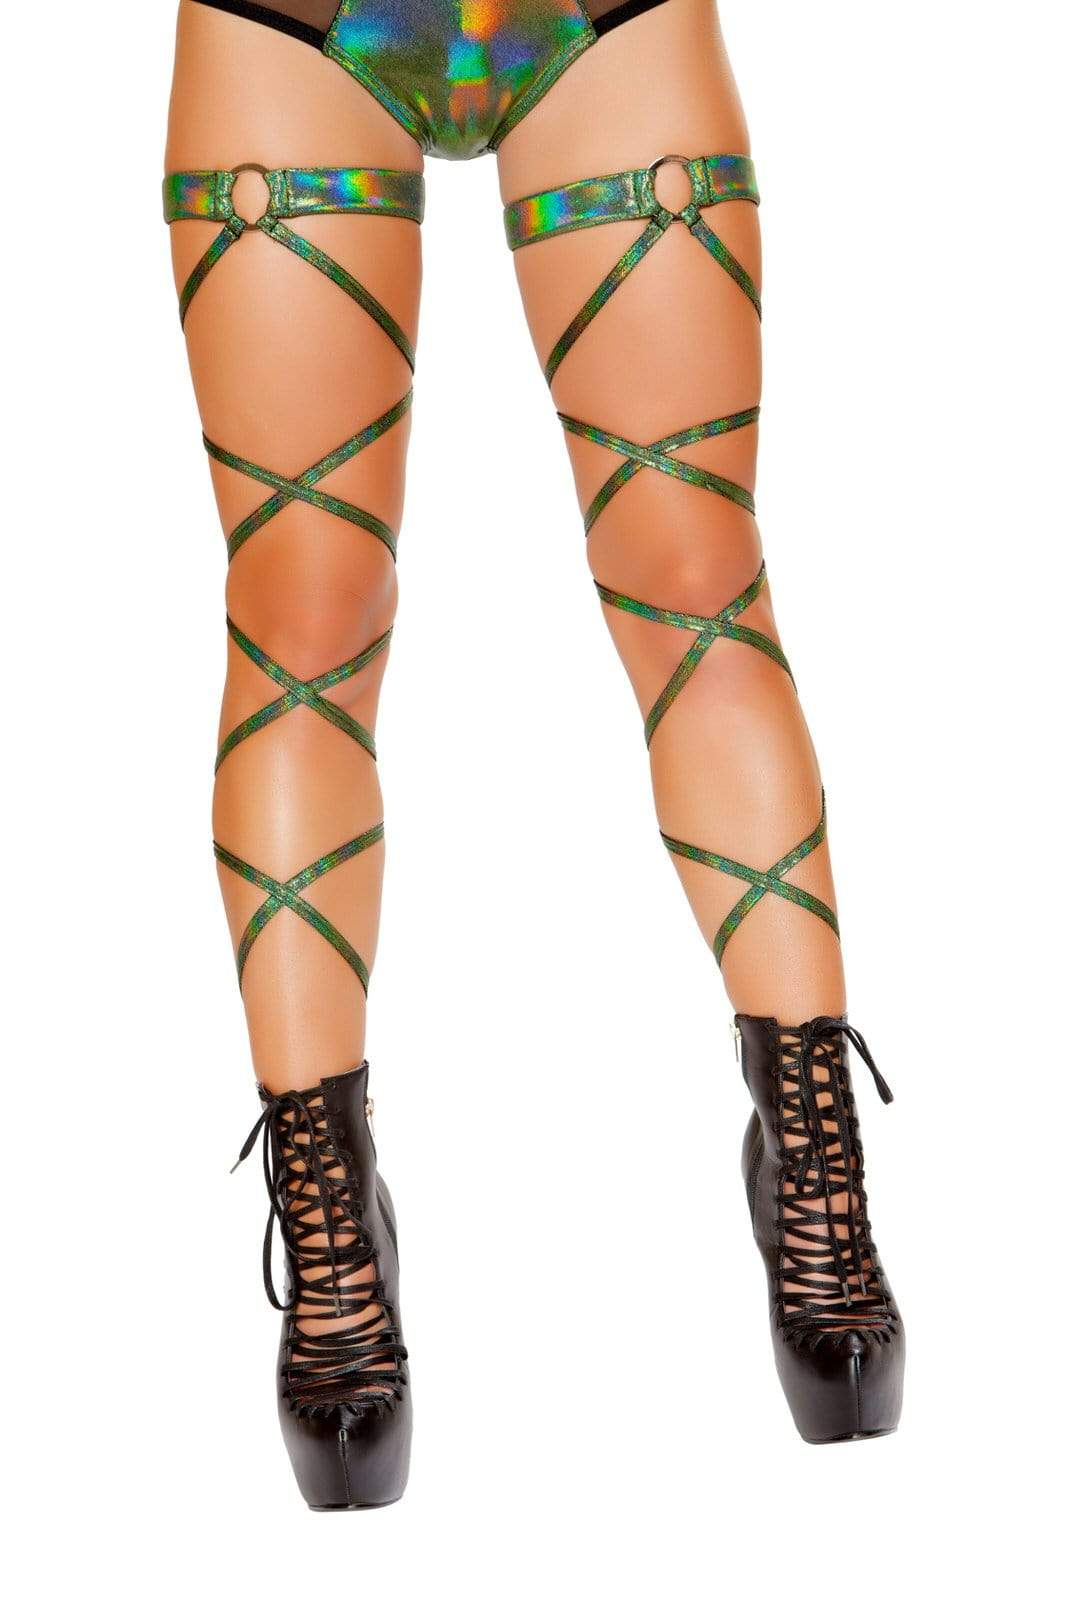 Roma ONE SIZE / GREEN Black Shimmer Iridescent Garter Leg Wraps w/ O-Ring EDM Dance Rave (Many colors available) SHC-3493-GREEN-R-2 Apparel & Accessories > Costumes & Accessories > Costumes